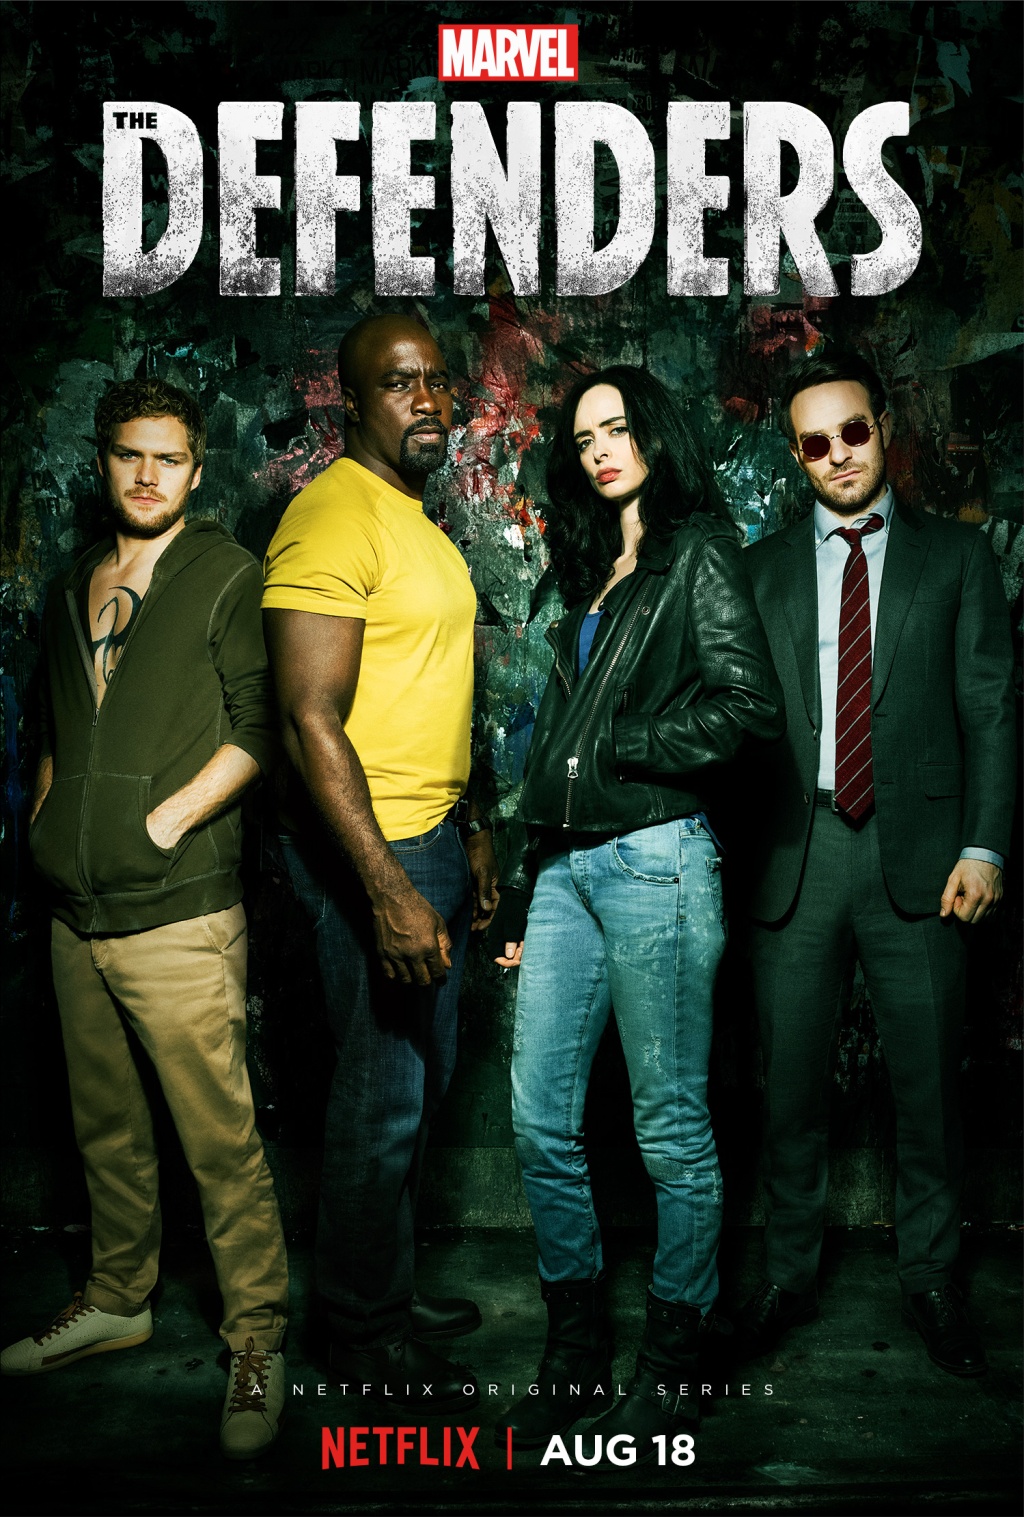 The Defenders (2017) - Tim Worthington joins Garreth Hirons for a chat about Iron Fist, Luke Cage, Jessica Jones and Daredevil protecting some dragon bones by punching buildings really bloody hard in It's Good, Except It Sucks - a movie by movie - and television series by television series - hurtle through the Marvel Cinematic Universe.